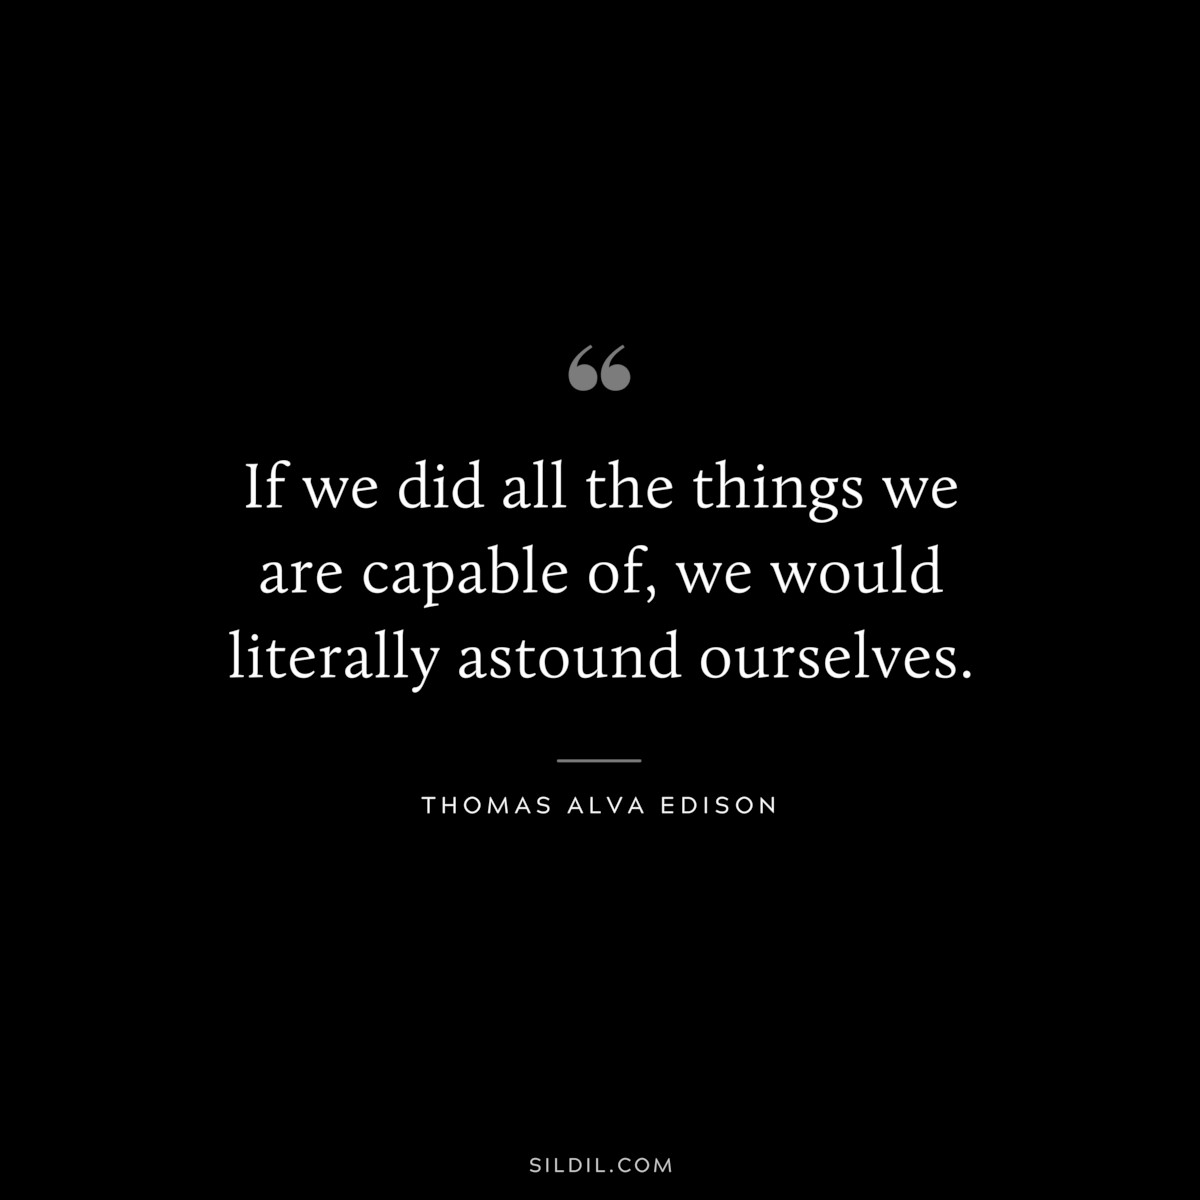 If we did all the things we are capable of, we would literally astound ourselves. ― Thomas Alva Edison